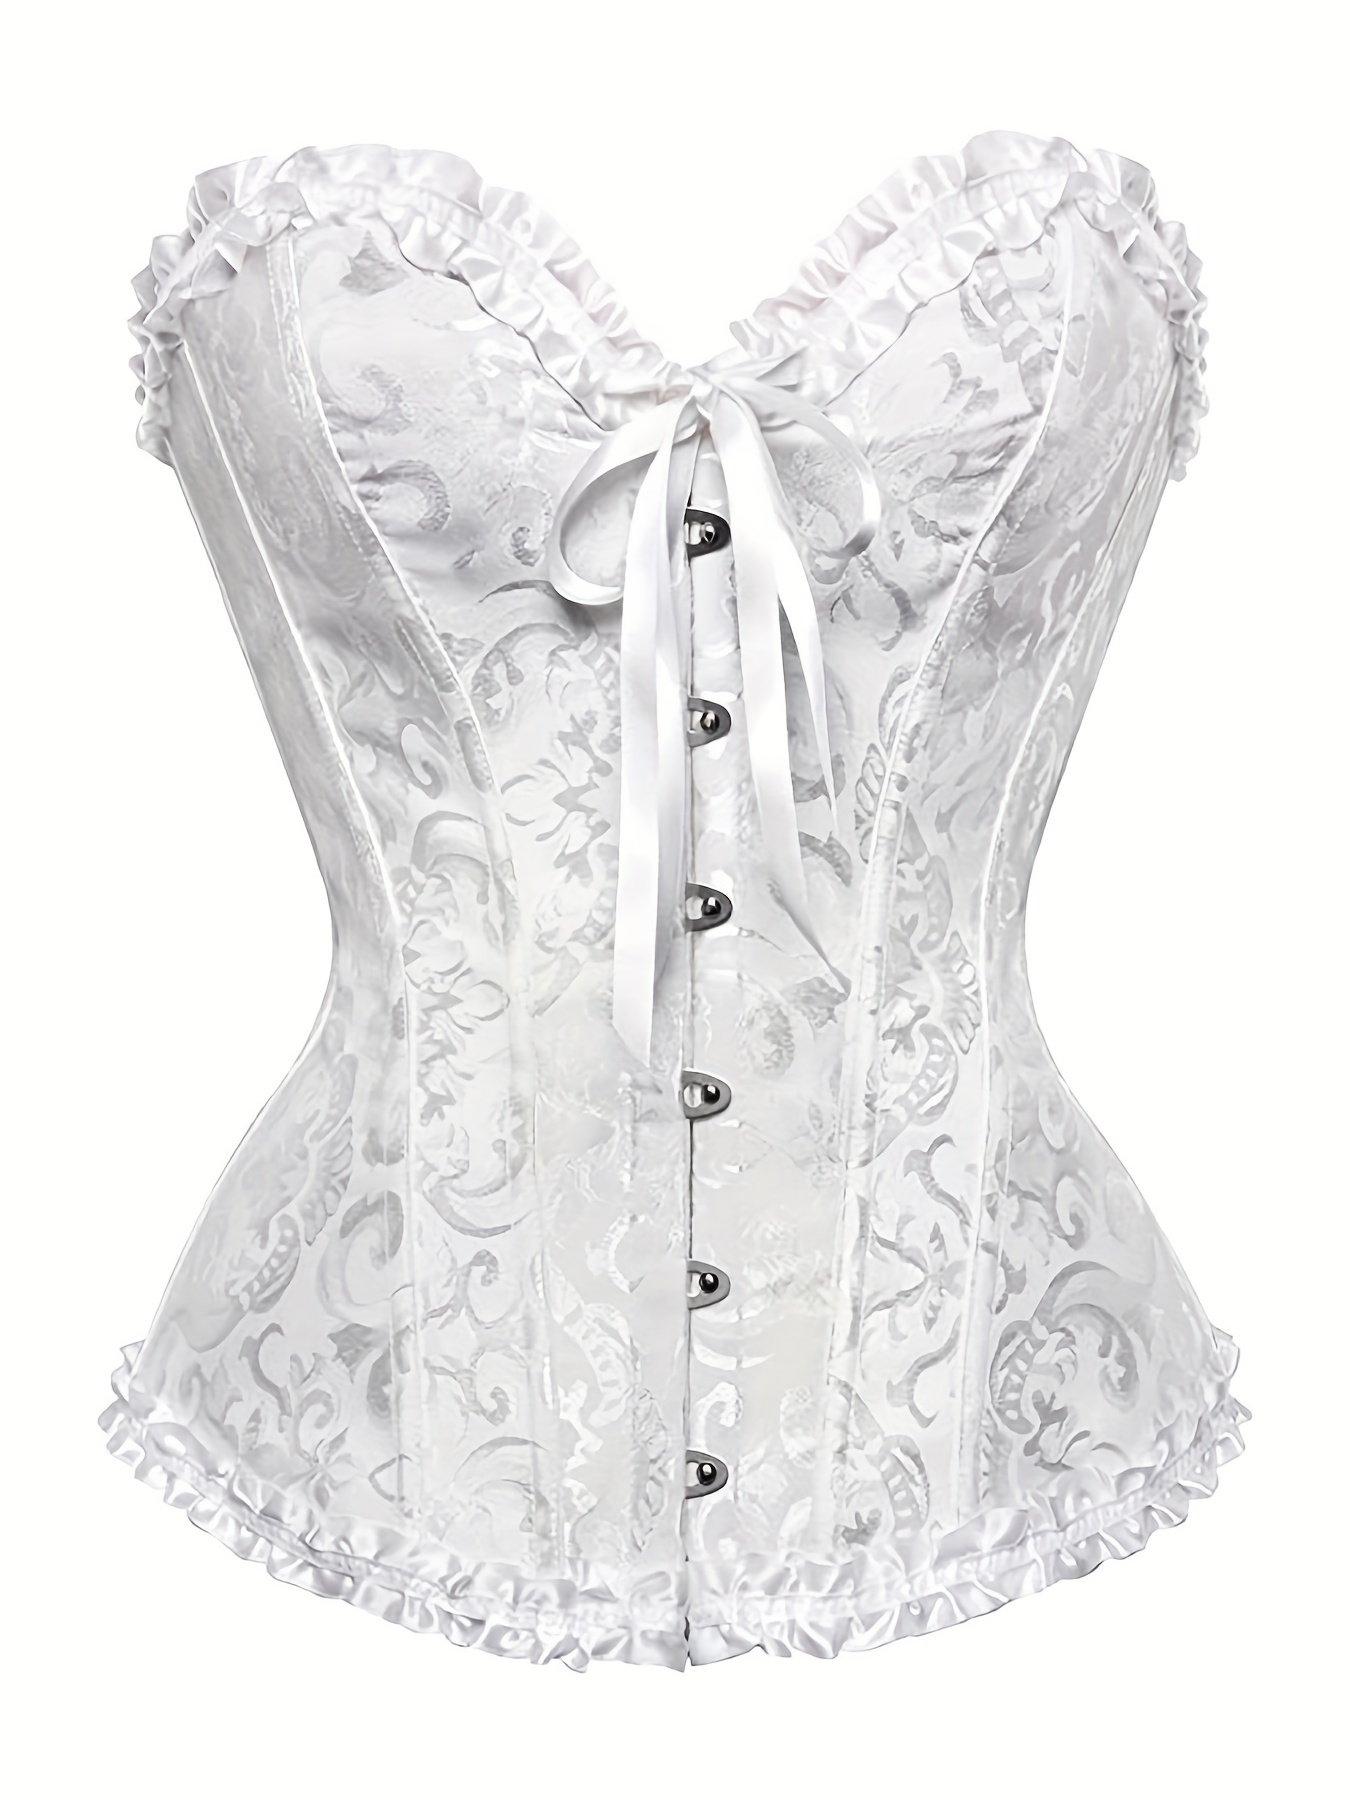 Ruffle Strapless Corset Bustier, Tummy Control Lace Up Jacquard Body ...